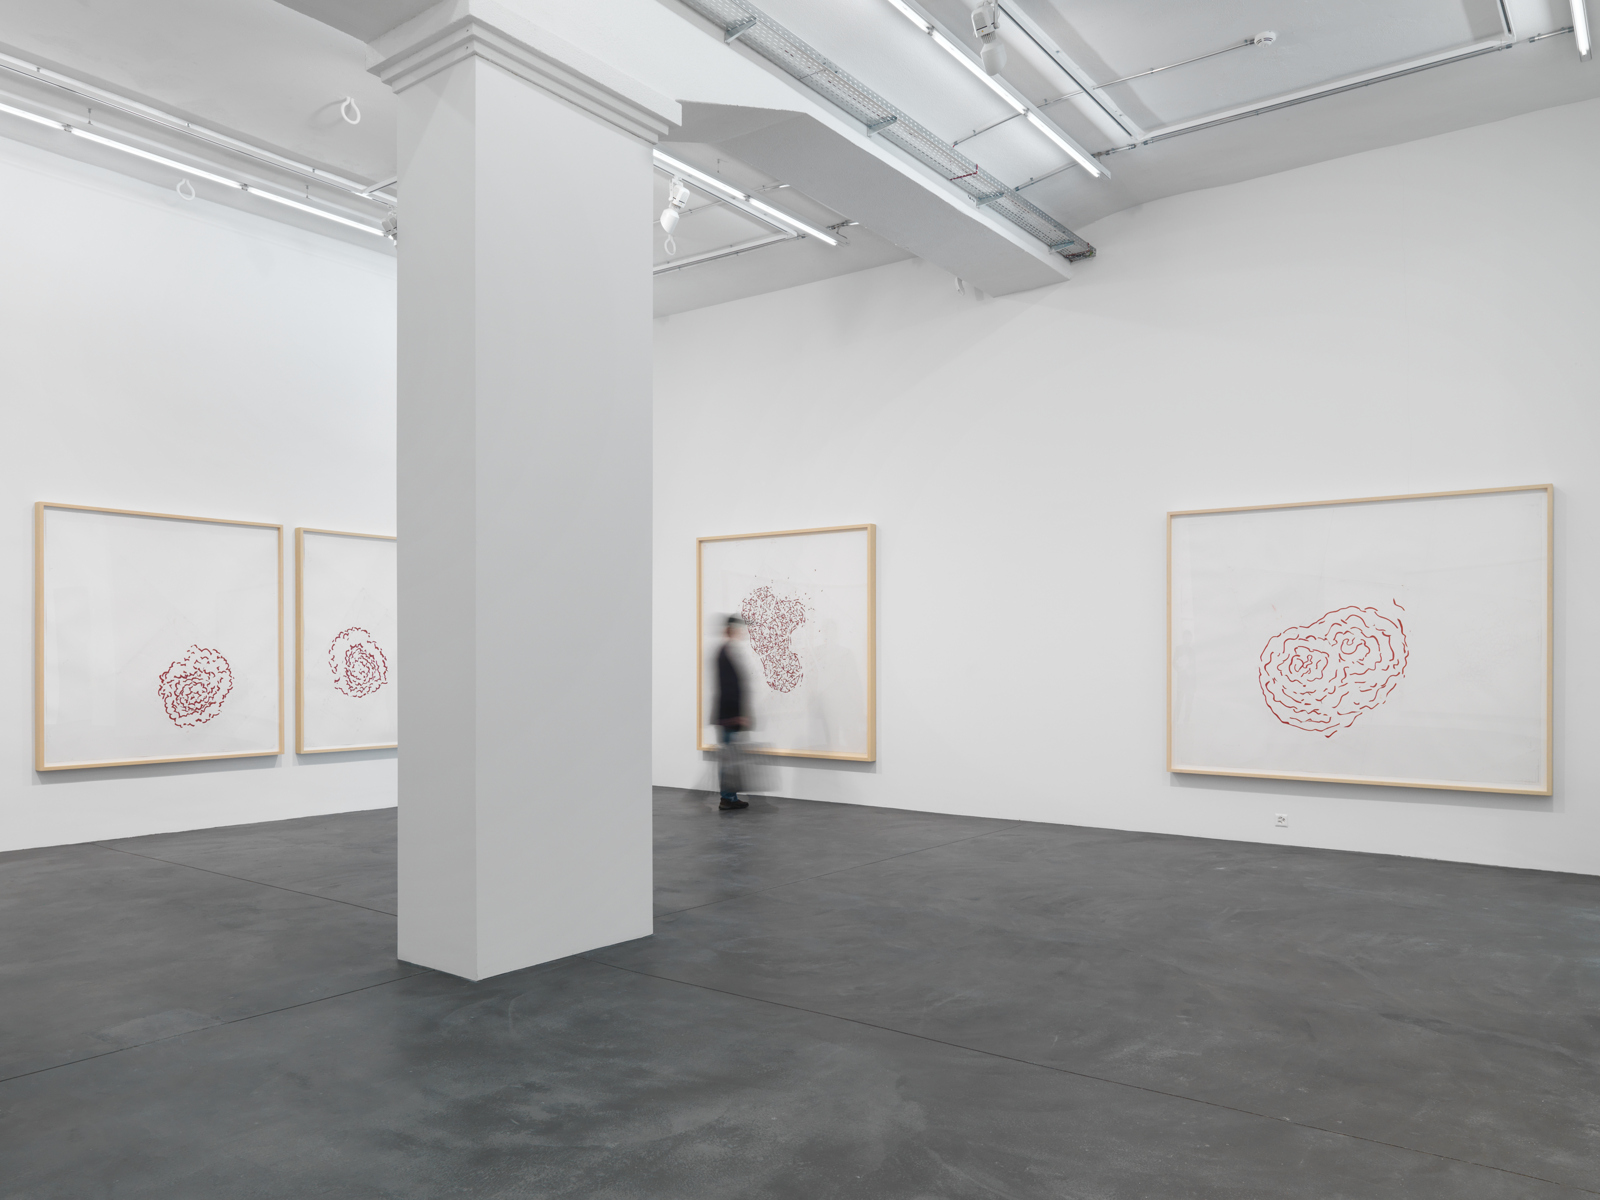 Roni Horn / "Selected Drawings 1984-2012", exhibition view, Hauser & Wirth Zürich / 2012